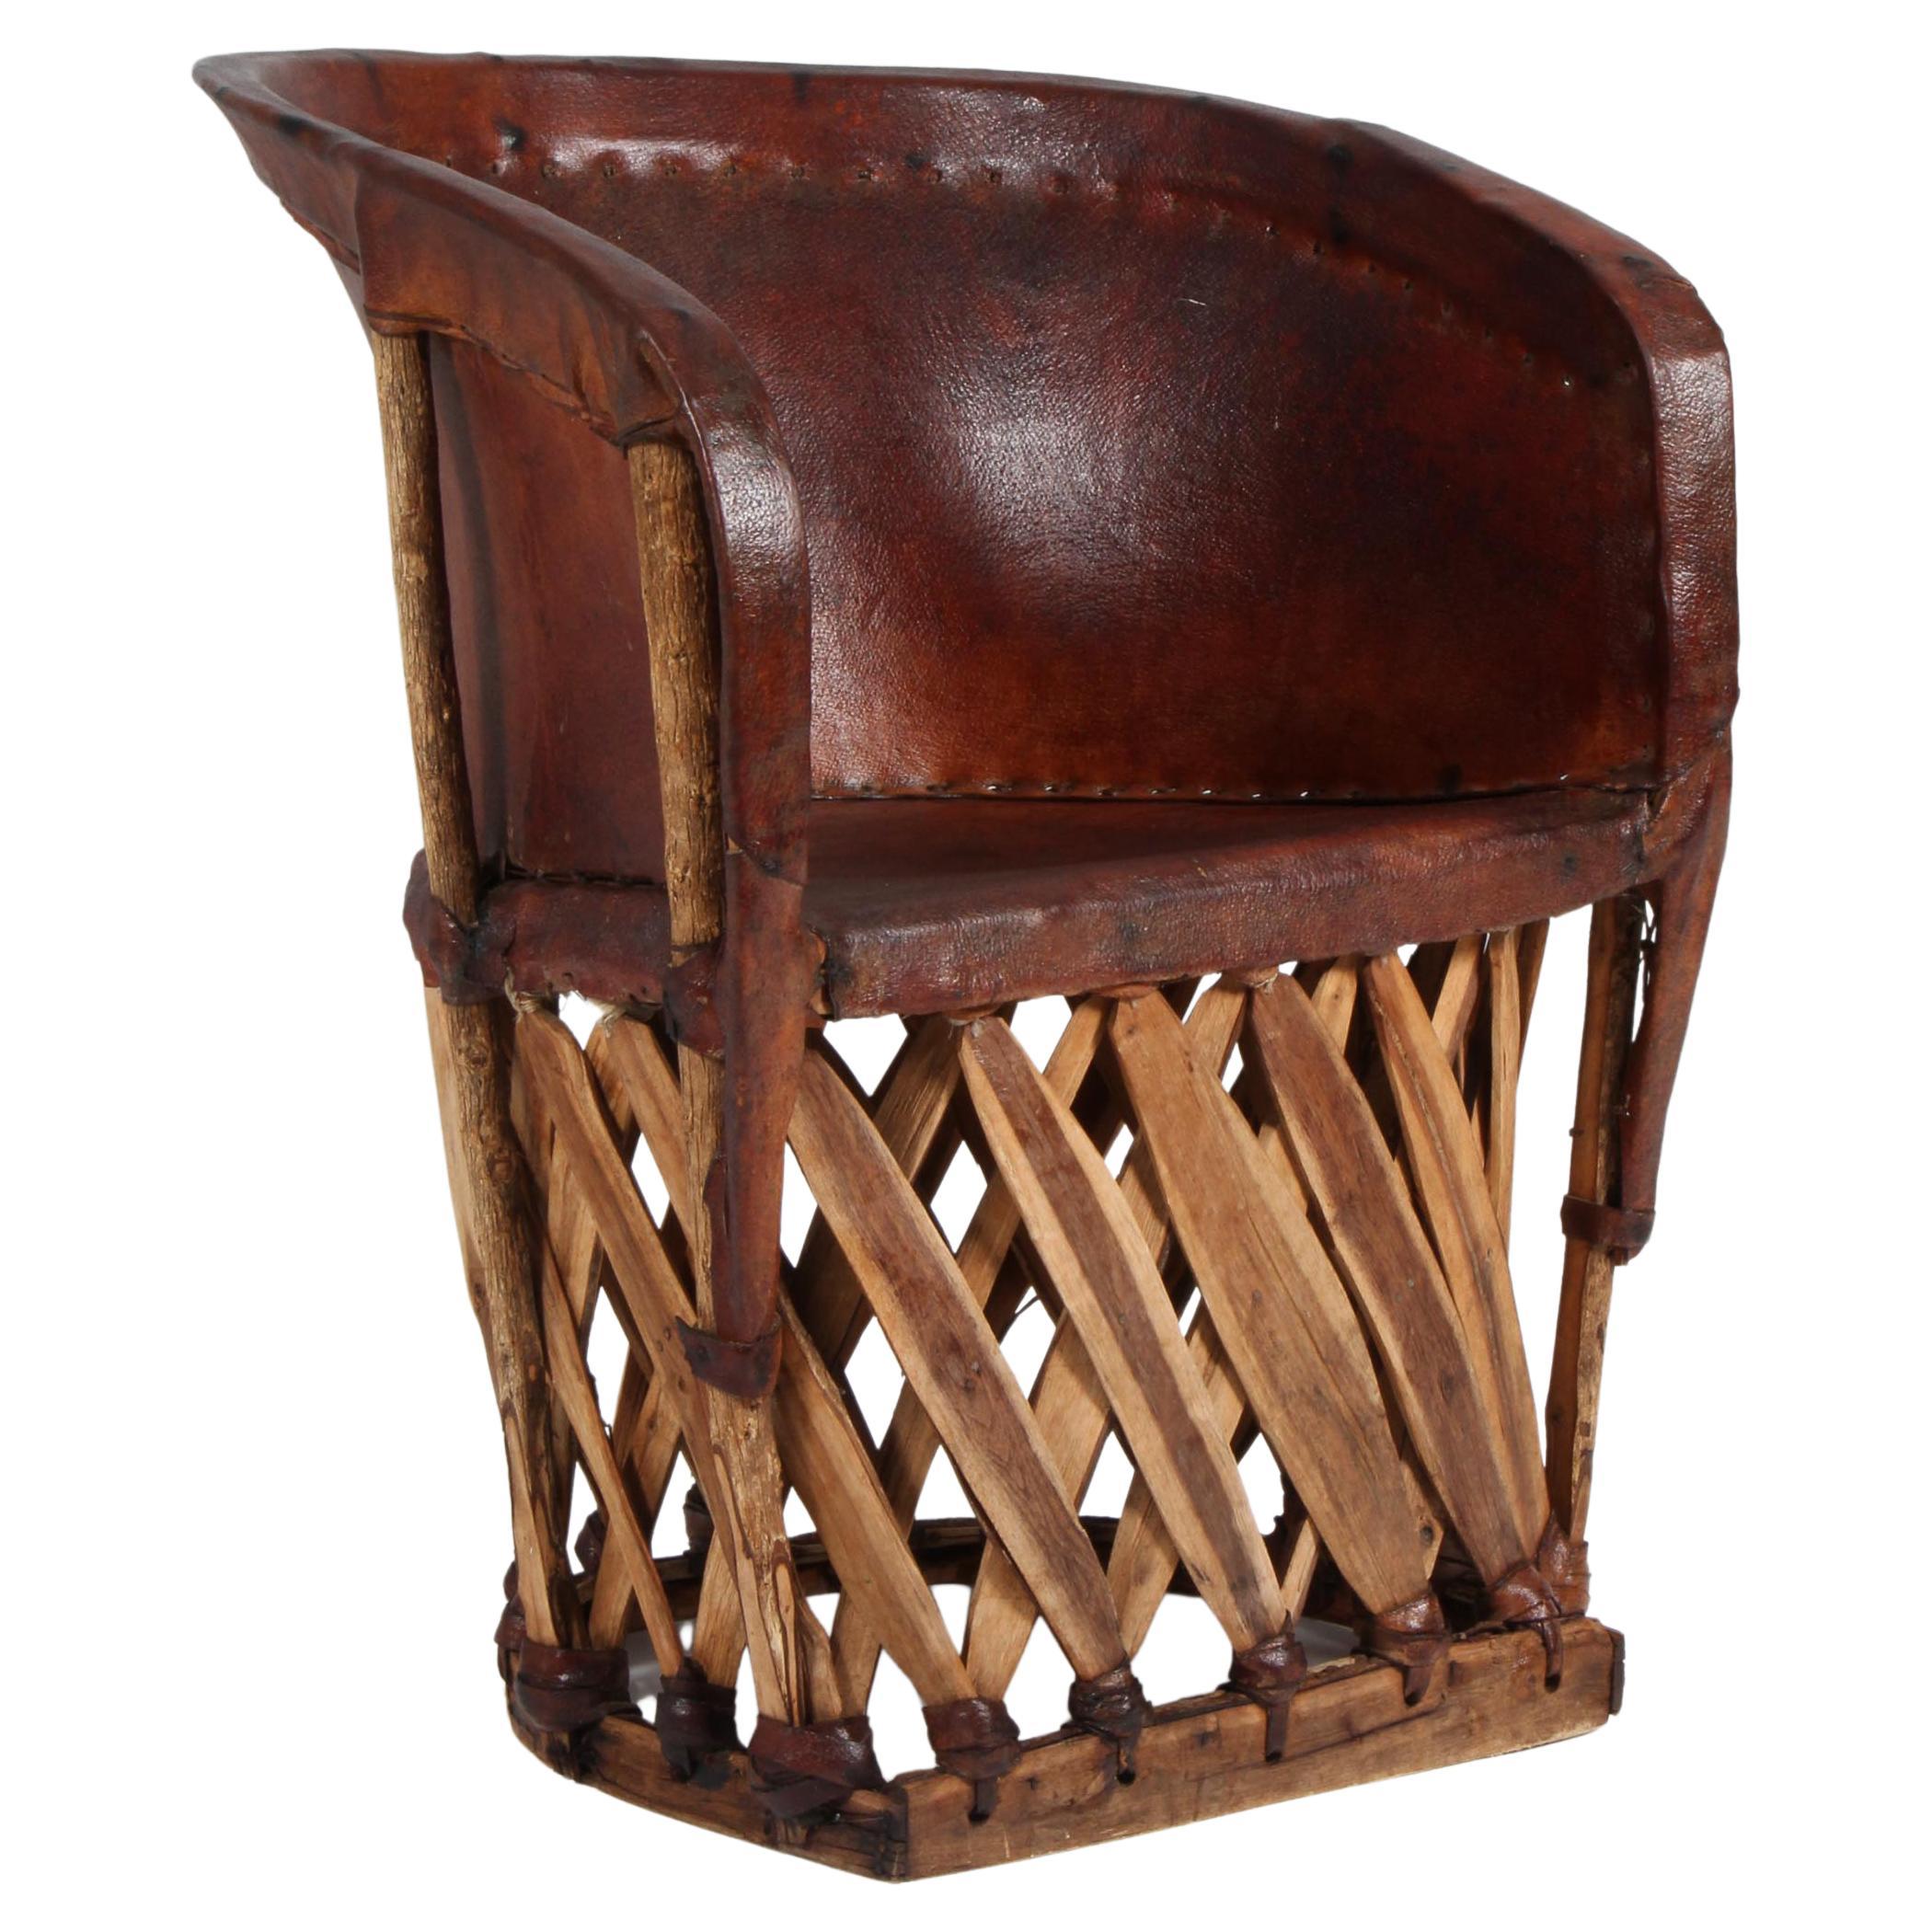 South American Lounge Chair in Leather and Wood, 20th Century